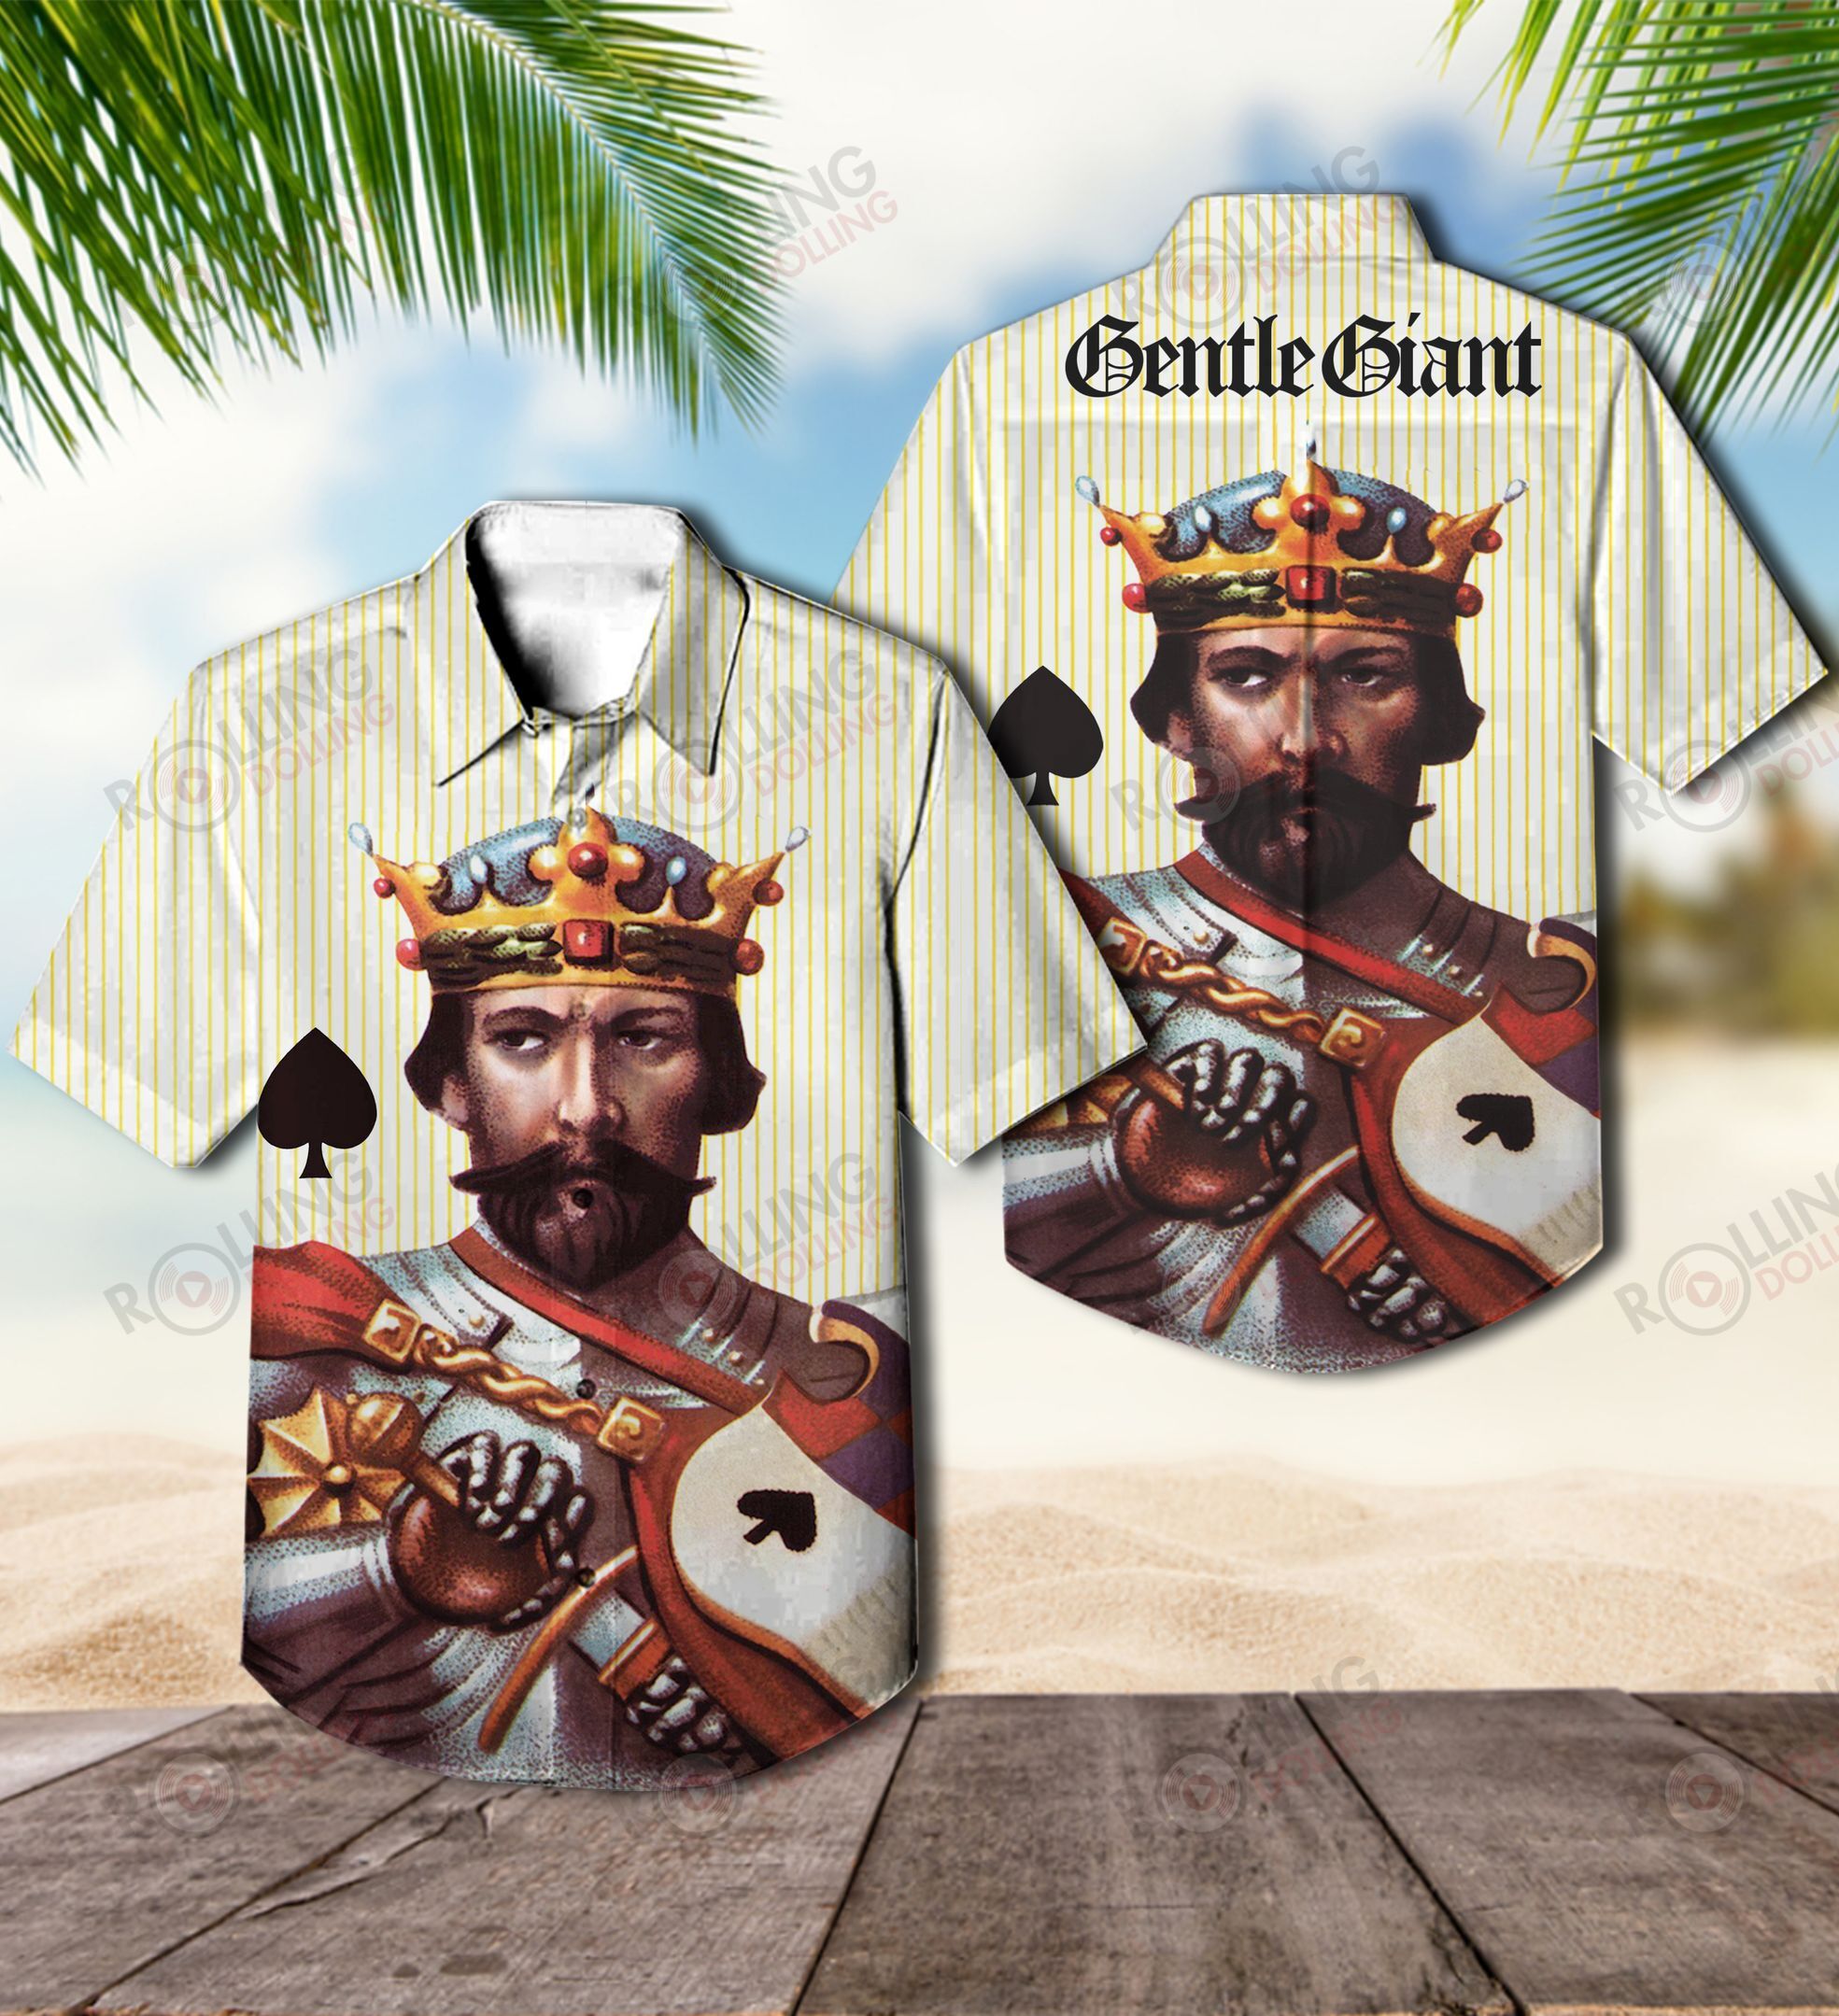 This would make a great gift for any fan who loves Hawaiian Shirt as well as Rock band 101